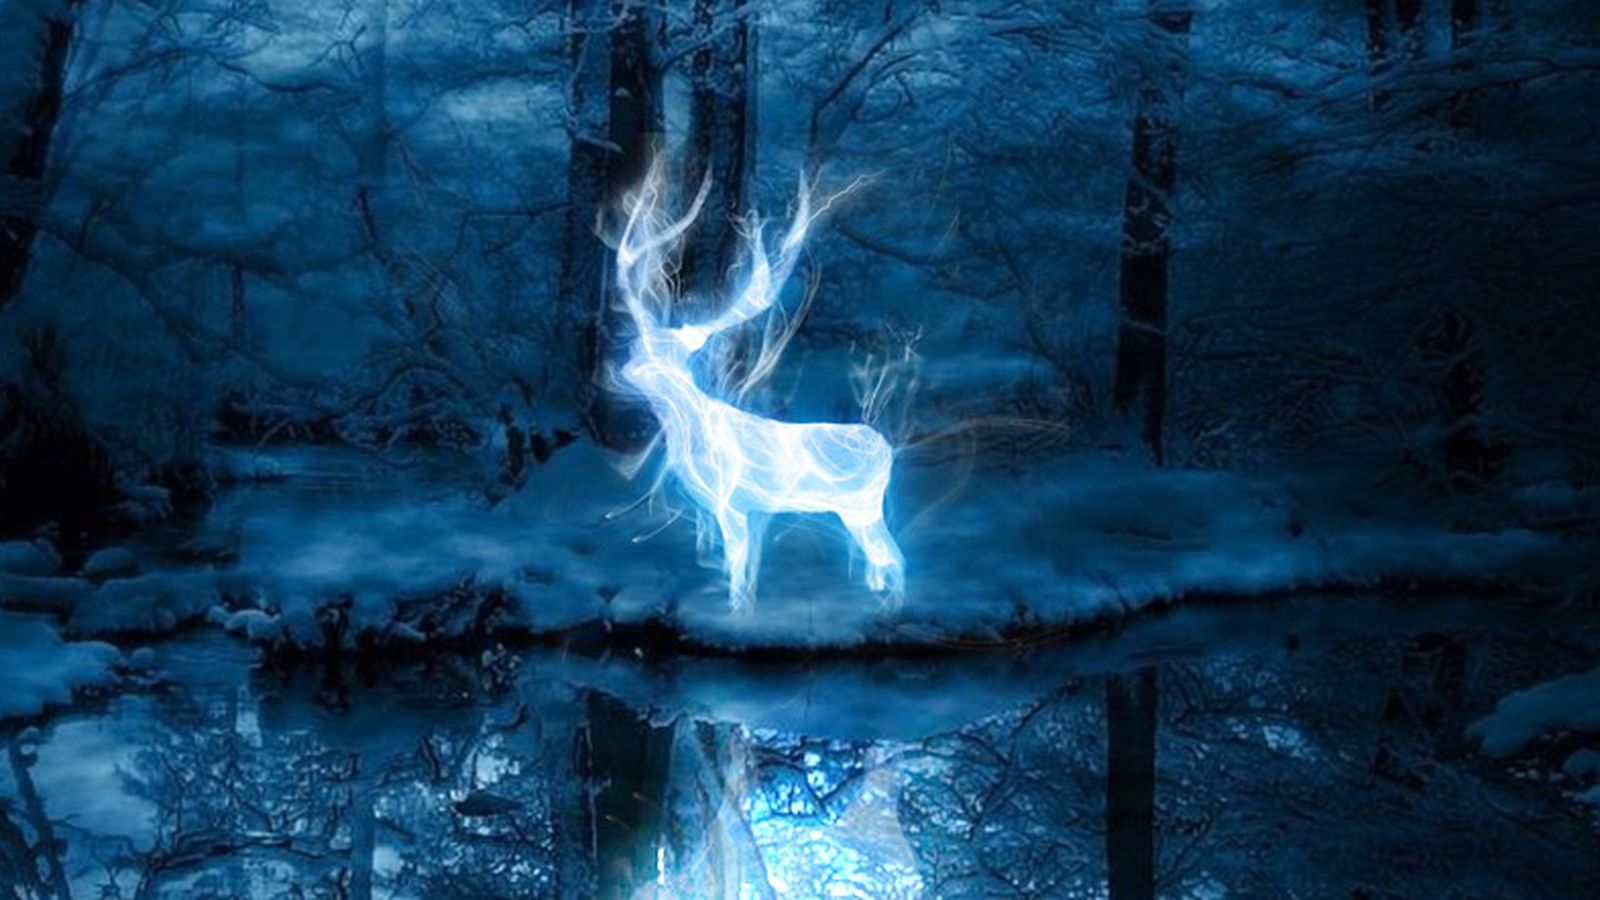 Take Pottermore's new Patronus quiz to find out if you're a dolphin, monkey, or mole?